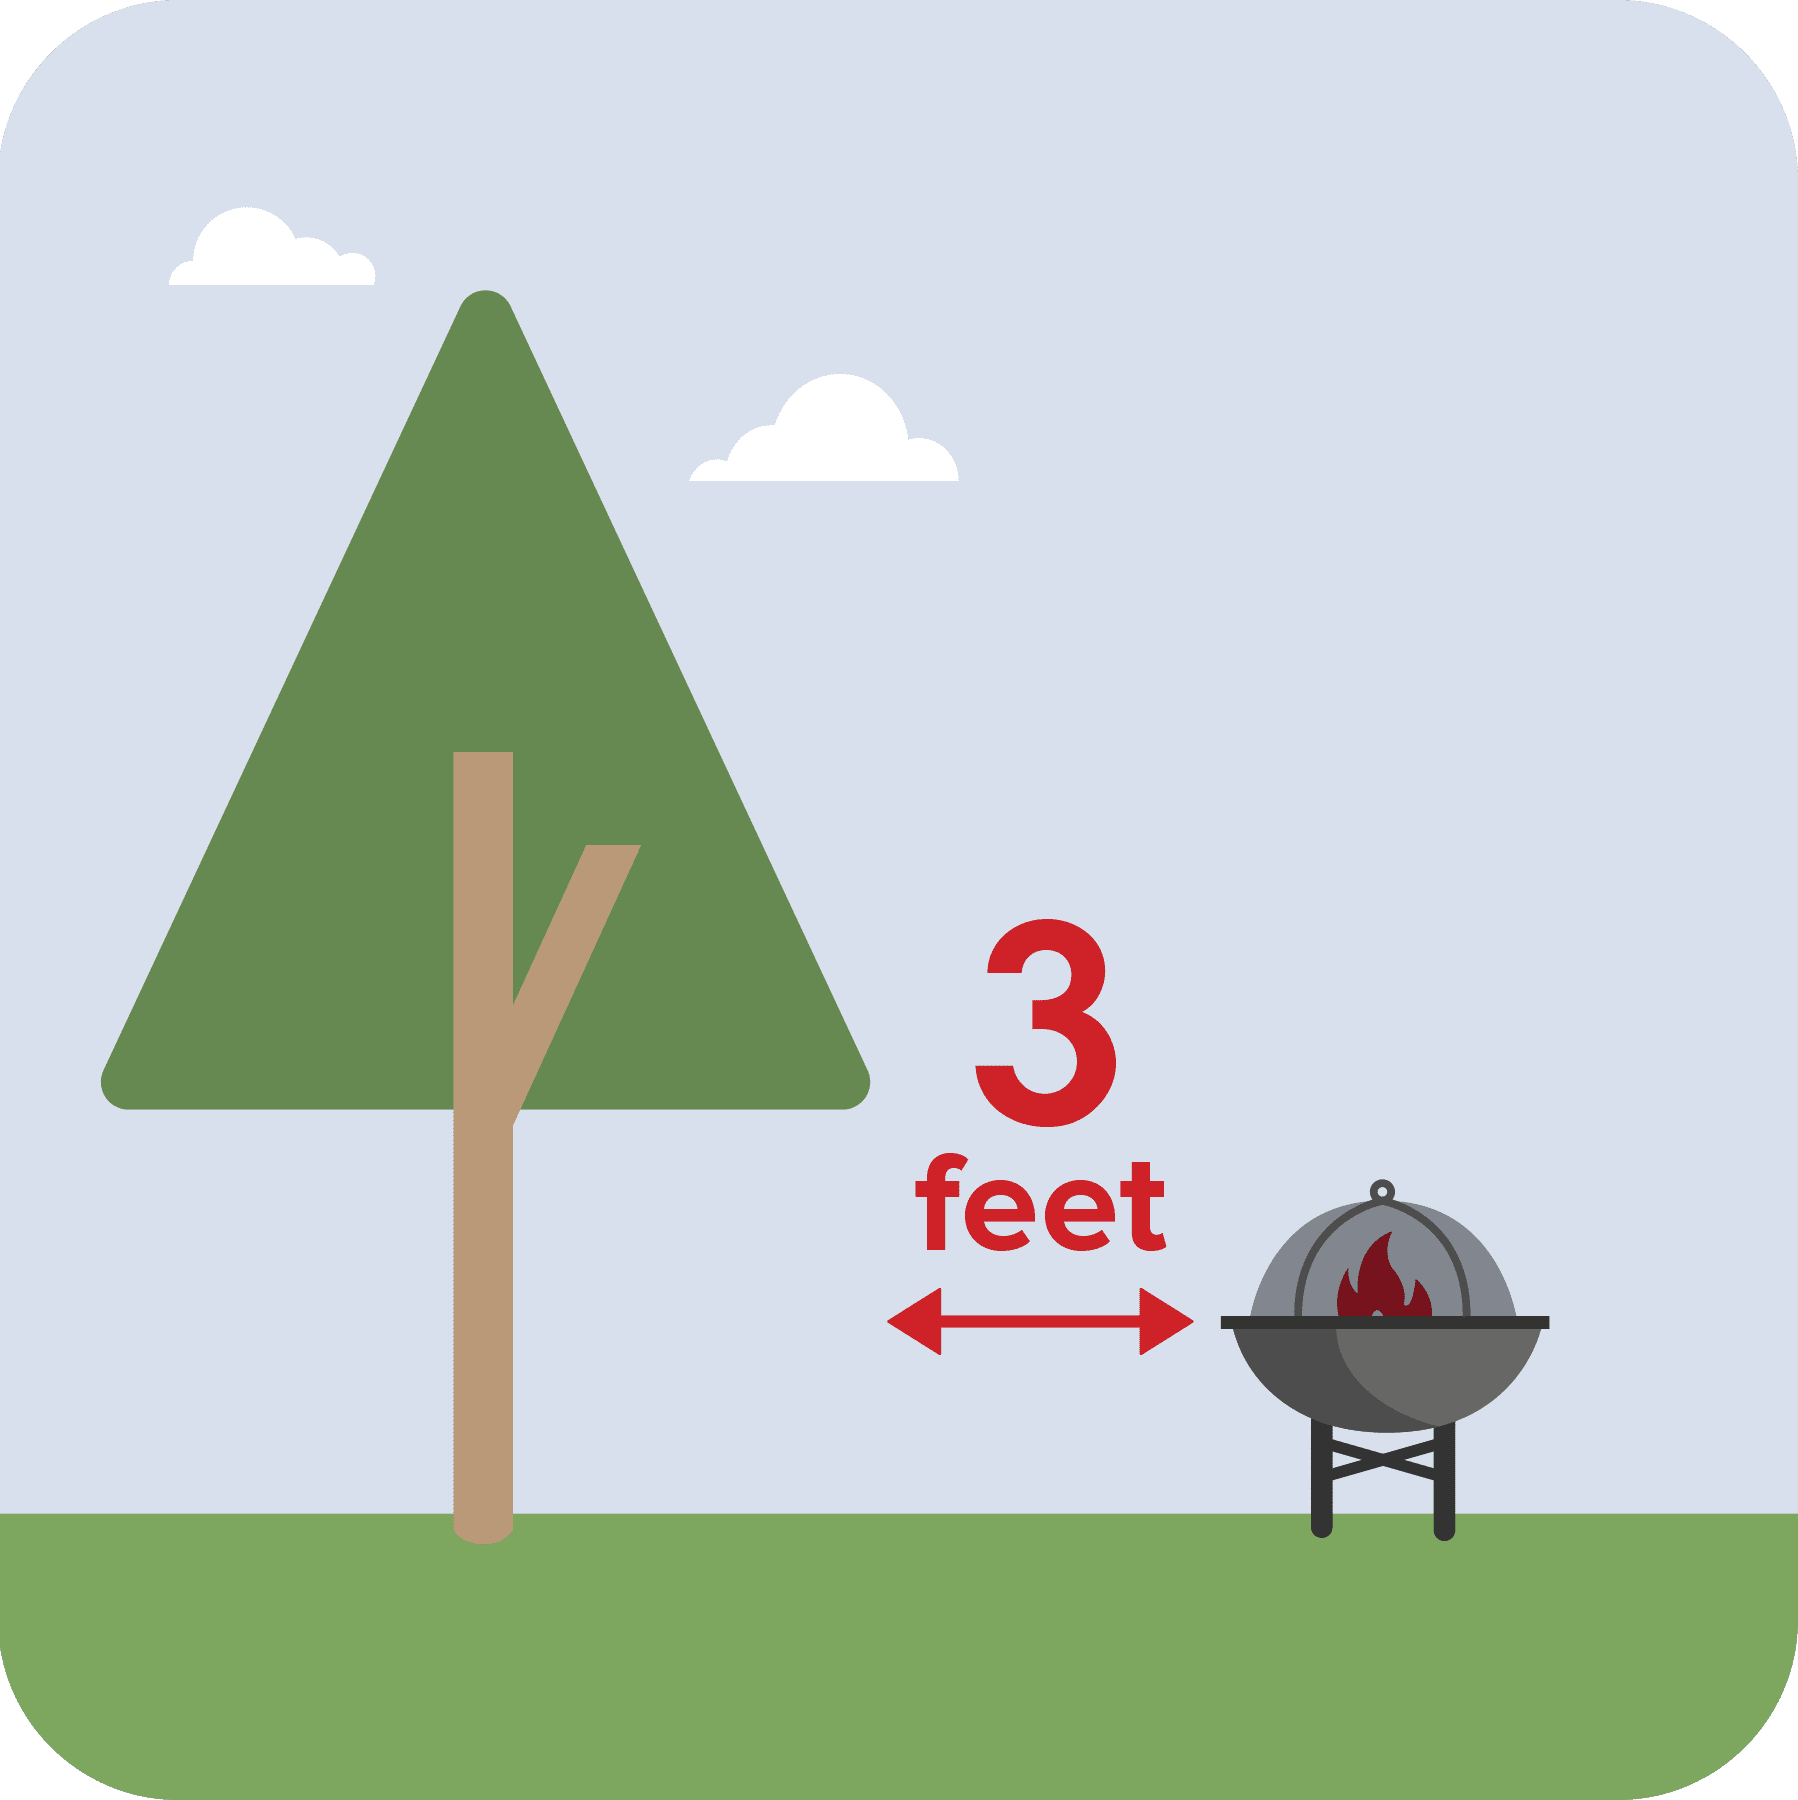 keep grills 3 feet from surroundings